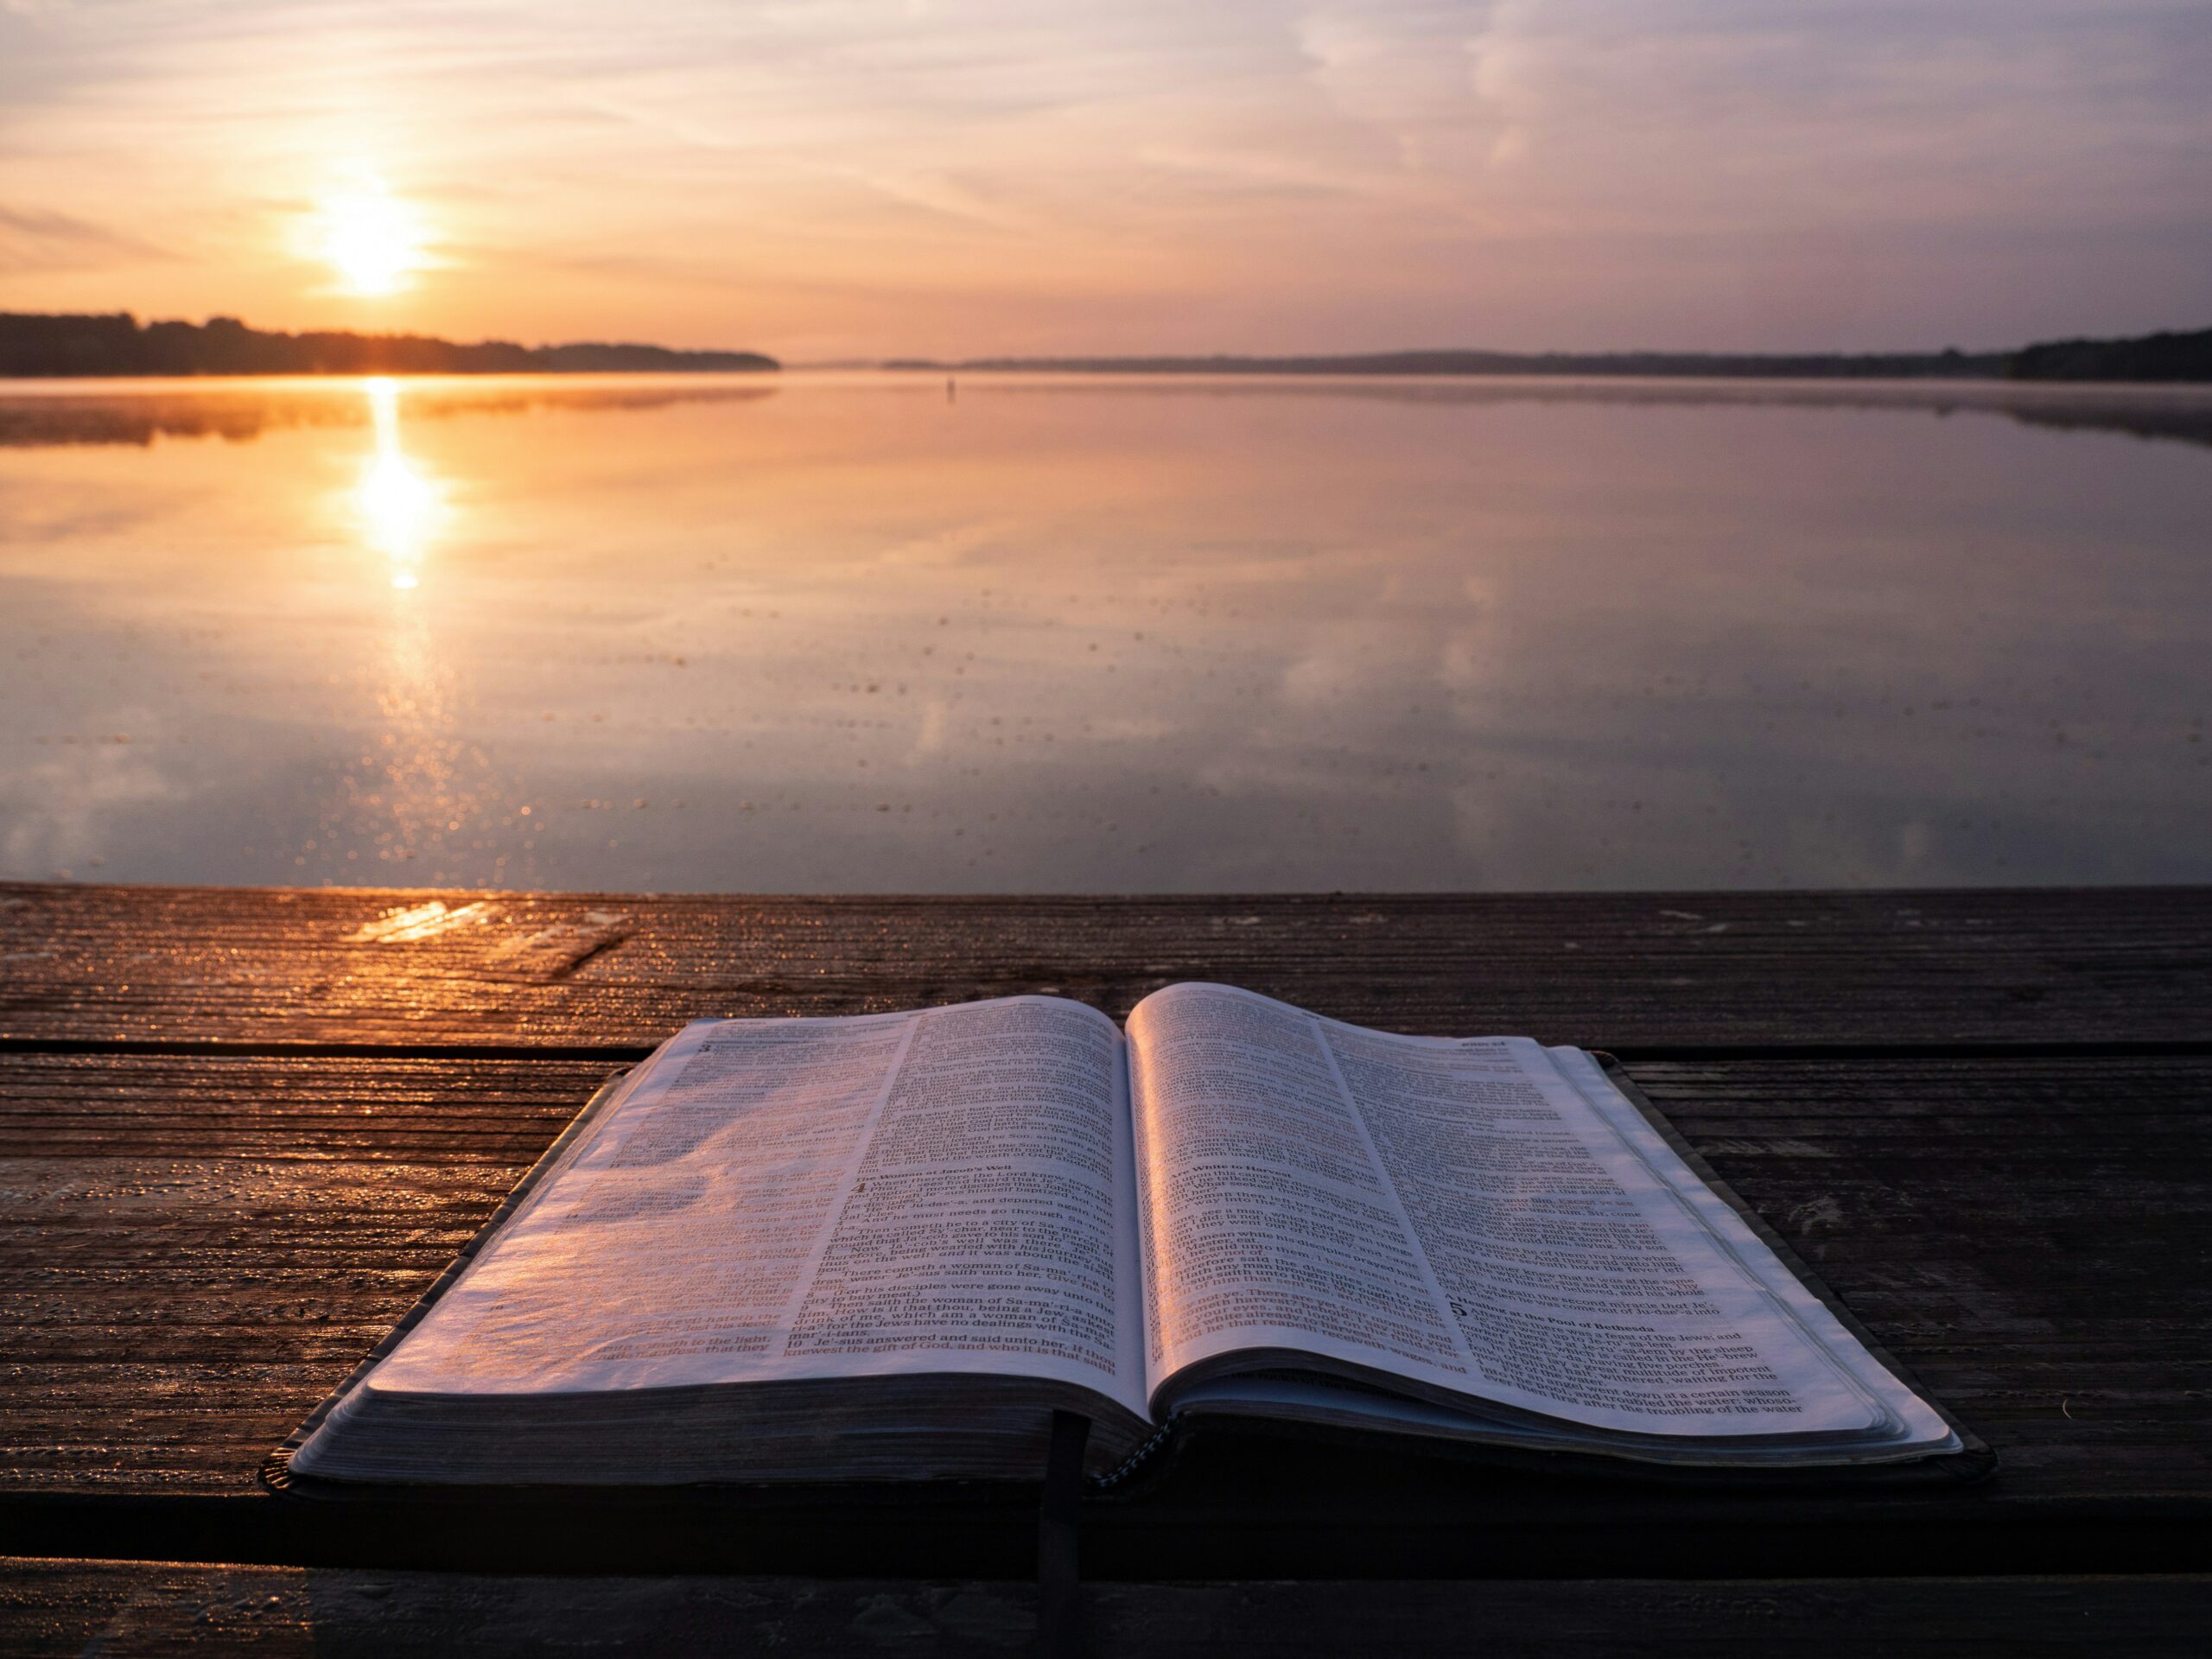 Is Scripture Reliable? 4 Common Objections and How To Answer.